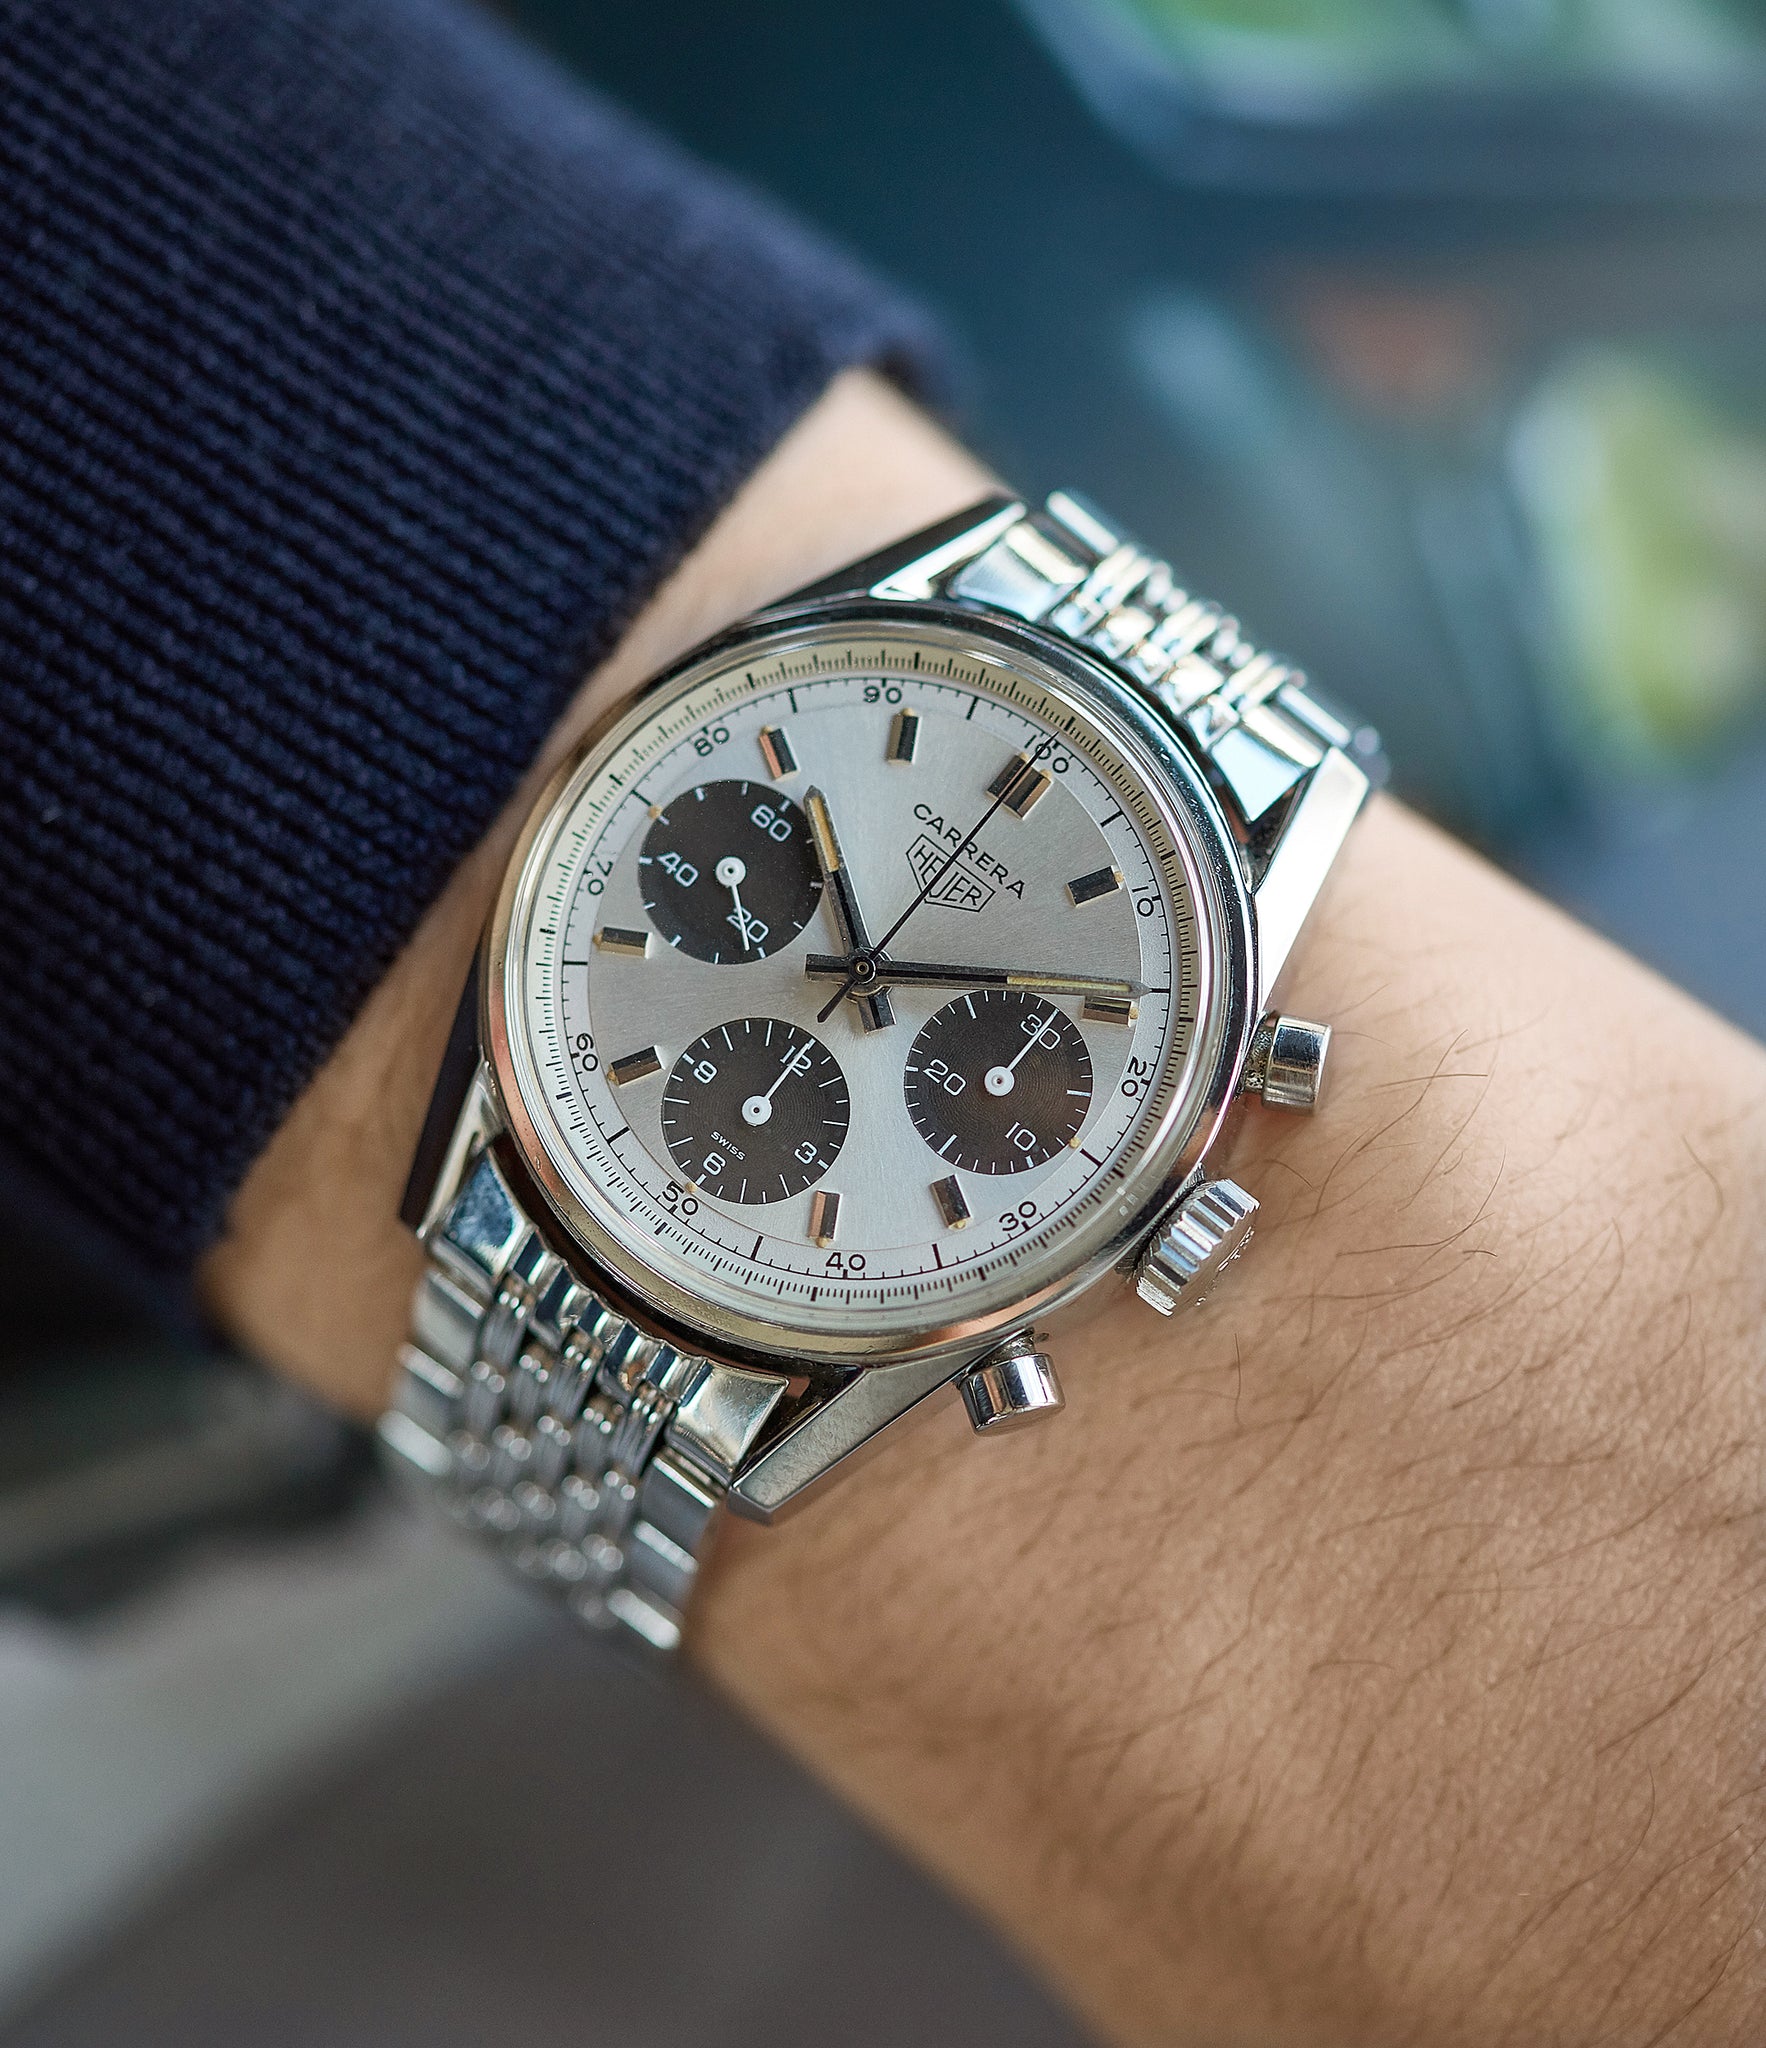 on the wrist vintage Heuer Carrera 2447SND panda dial steel sport watch online at A Collected Man London UK specialist of rare vintage watches